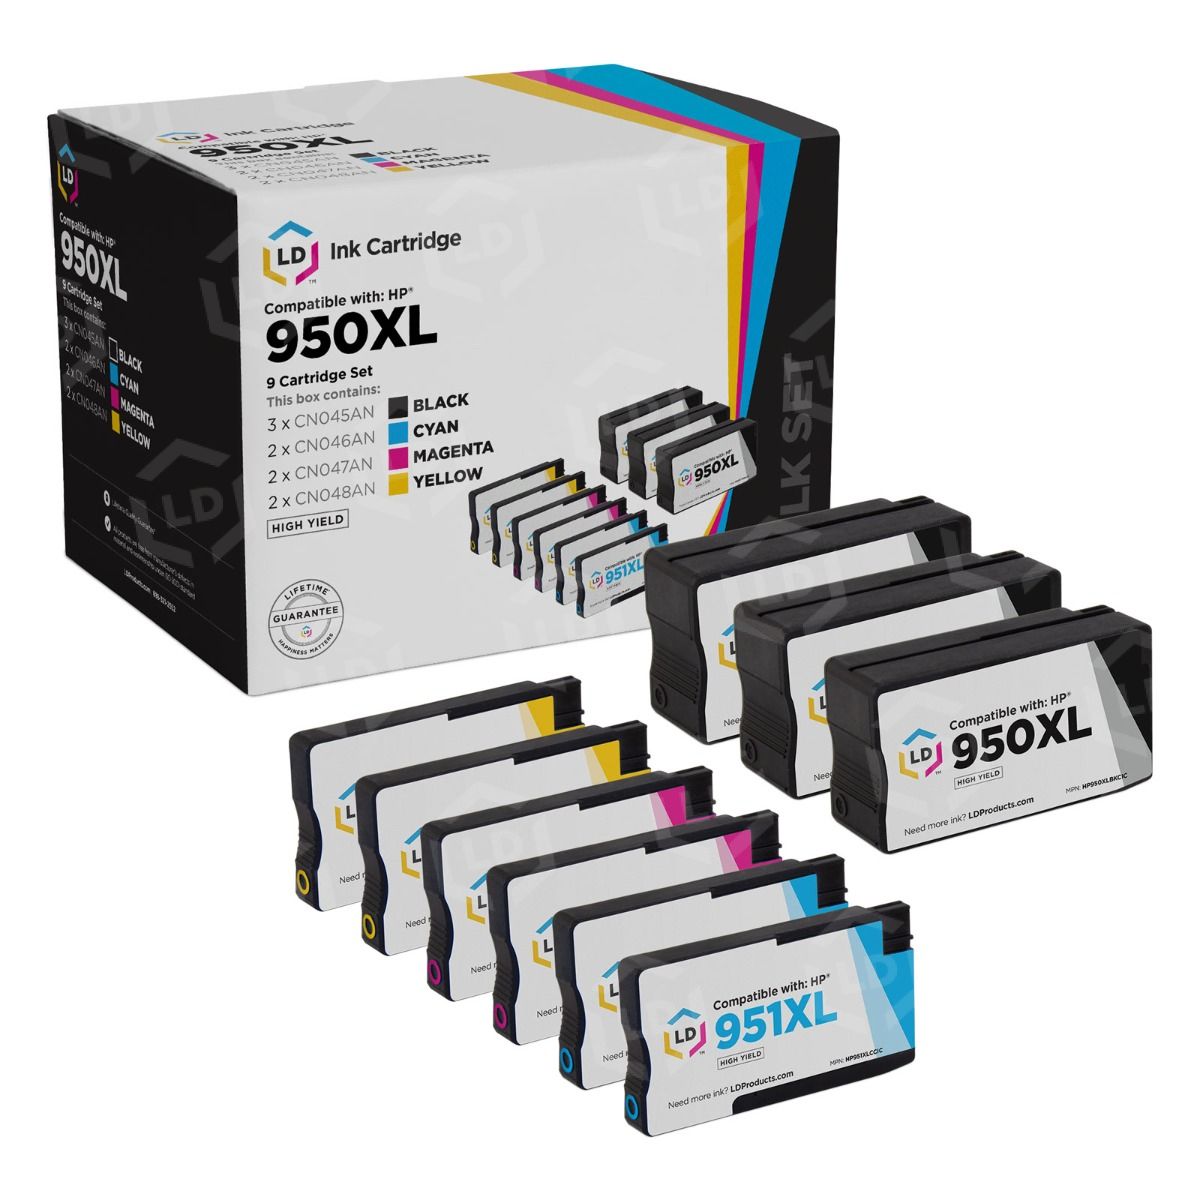 【5-Pack Larger Capacity】 950XL 951XL Ink Cartridges Combo Pack, Replacement  for HP 950 951 XL Ink Cartridges, High Page Yield, Works with OfficeJet